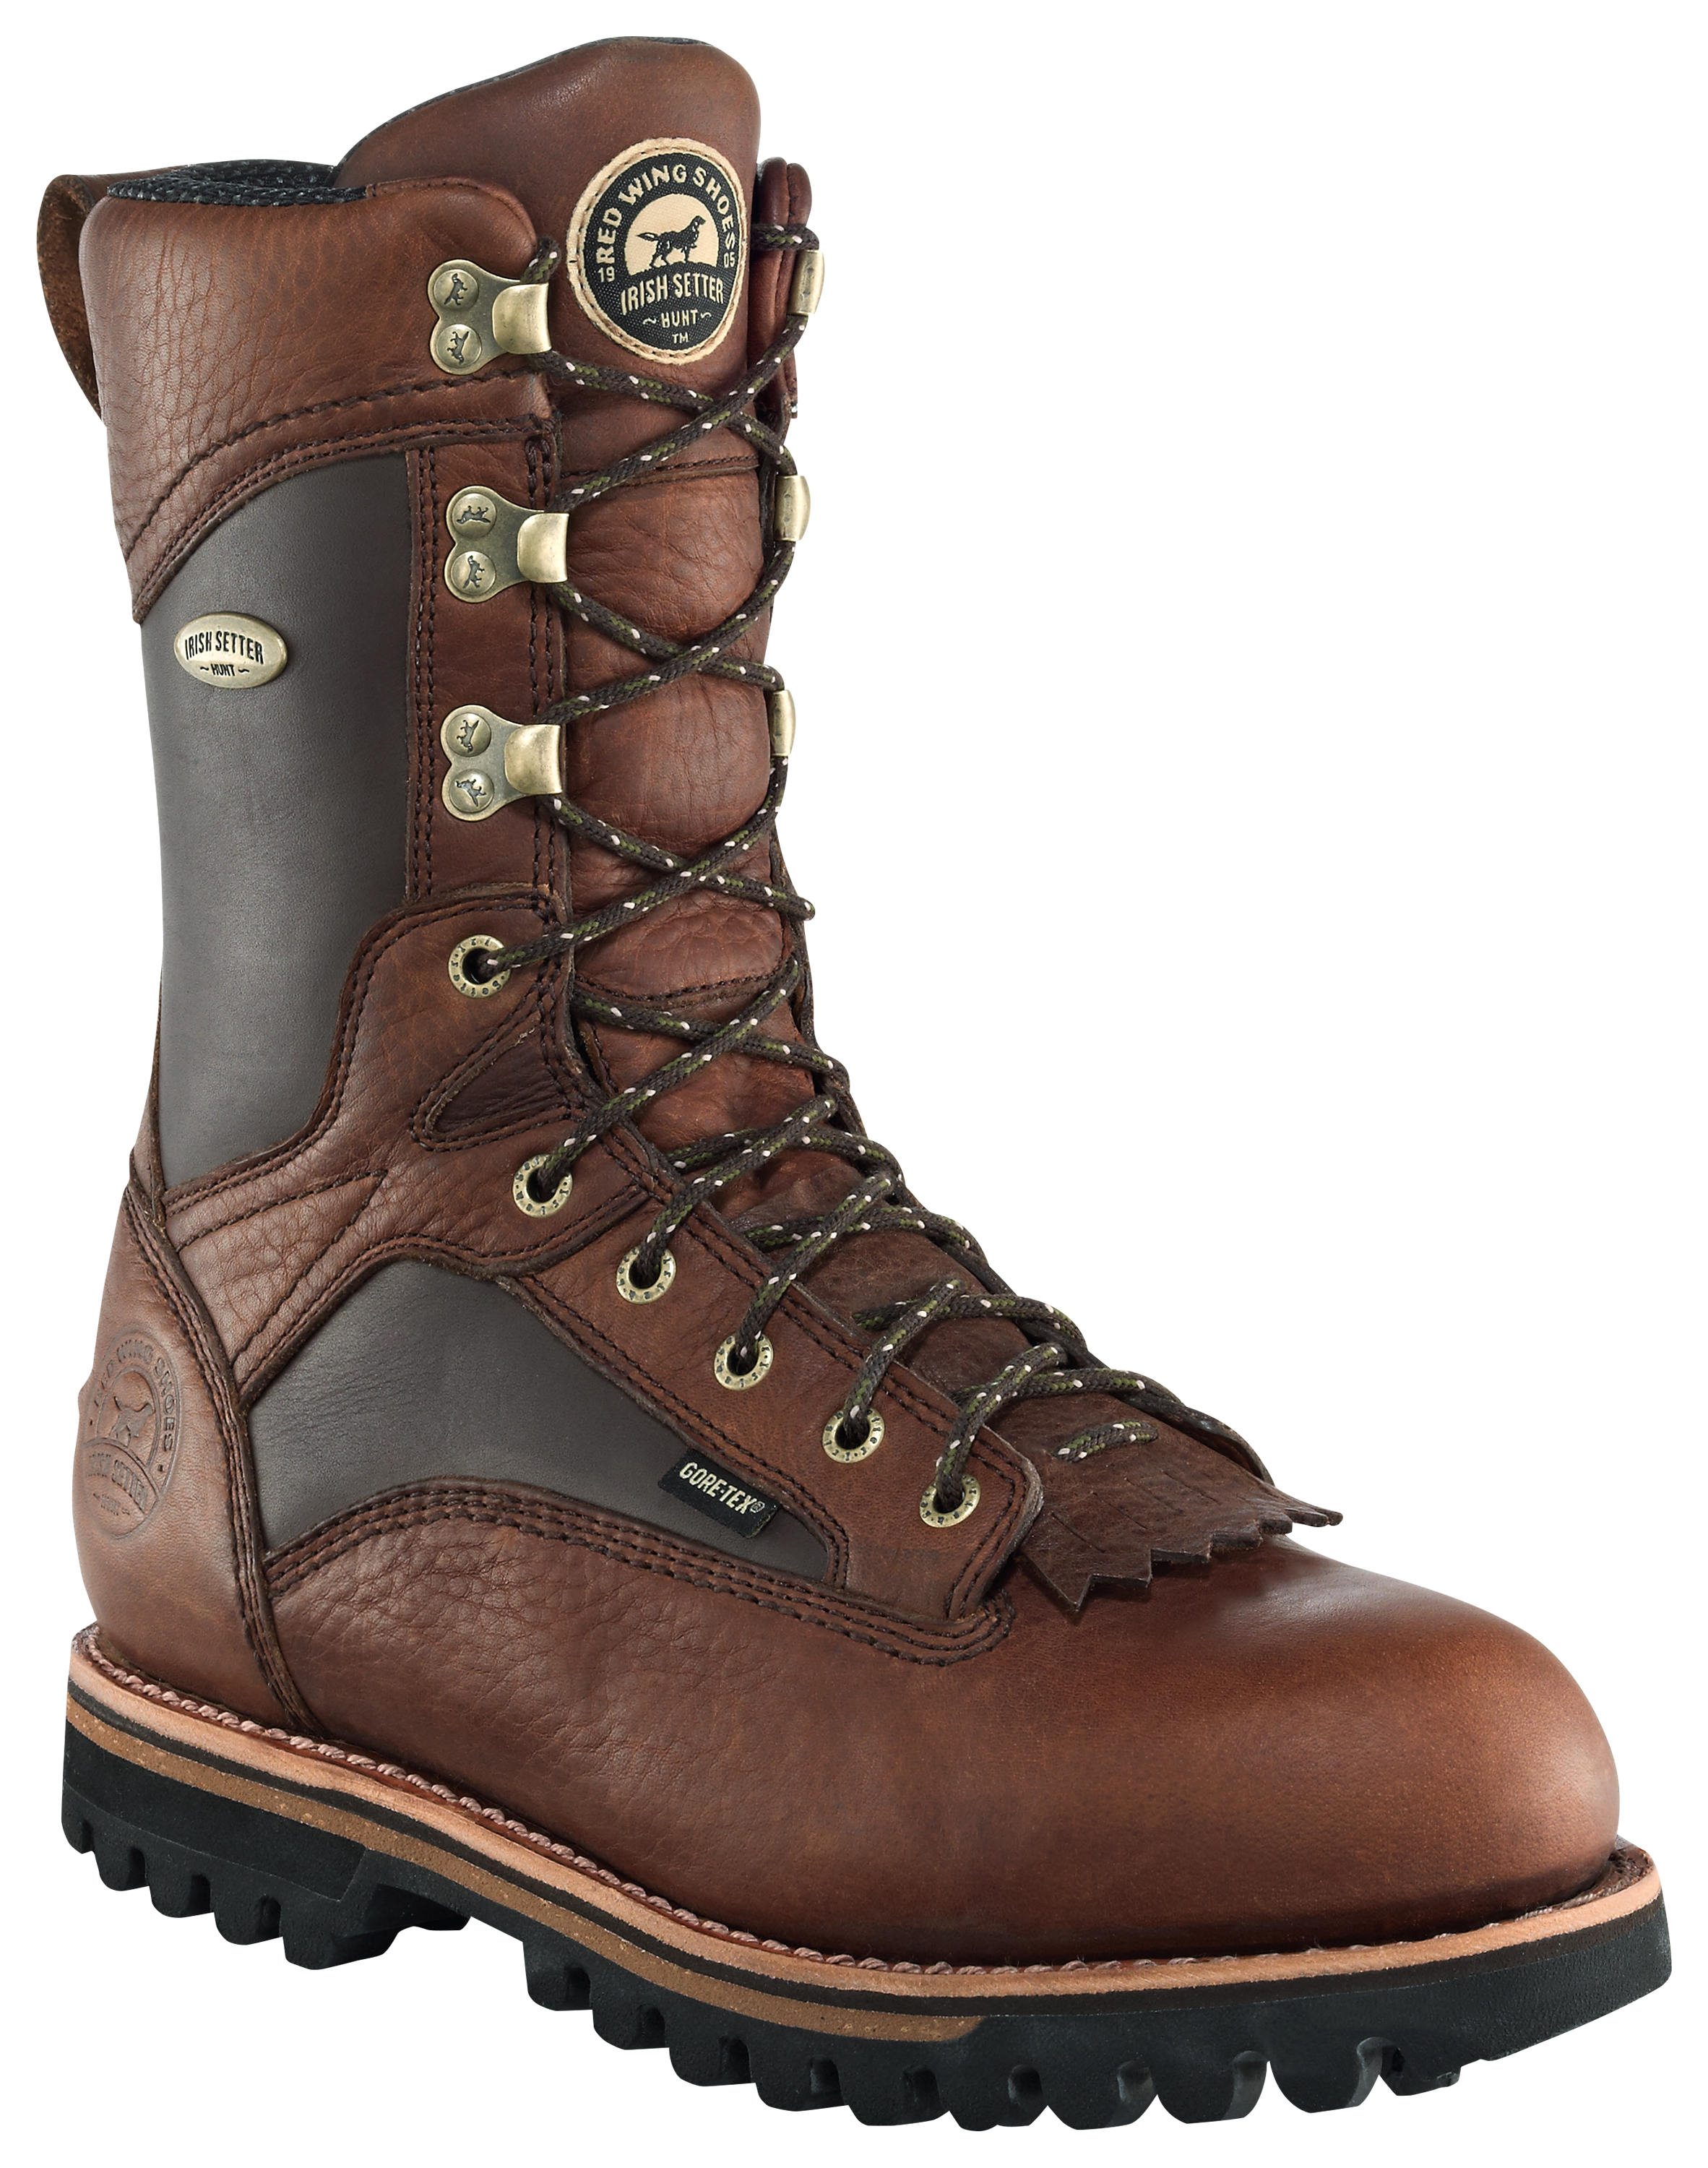 Irish Setter Elk Tracker 12'' 600 Gram Thinsulate Insulated Waterproof Hunting Boots for Men - Brown - 8 Extra Wide H